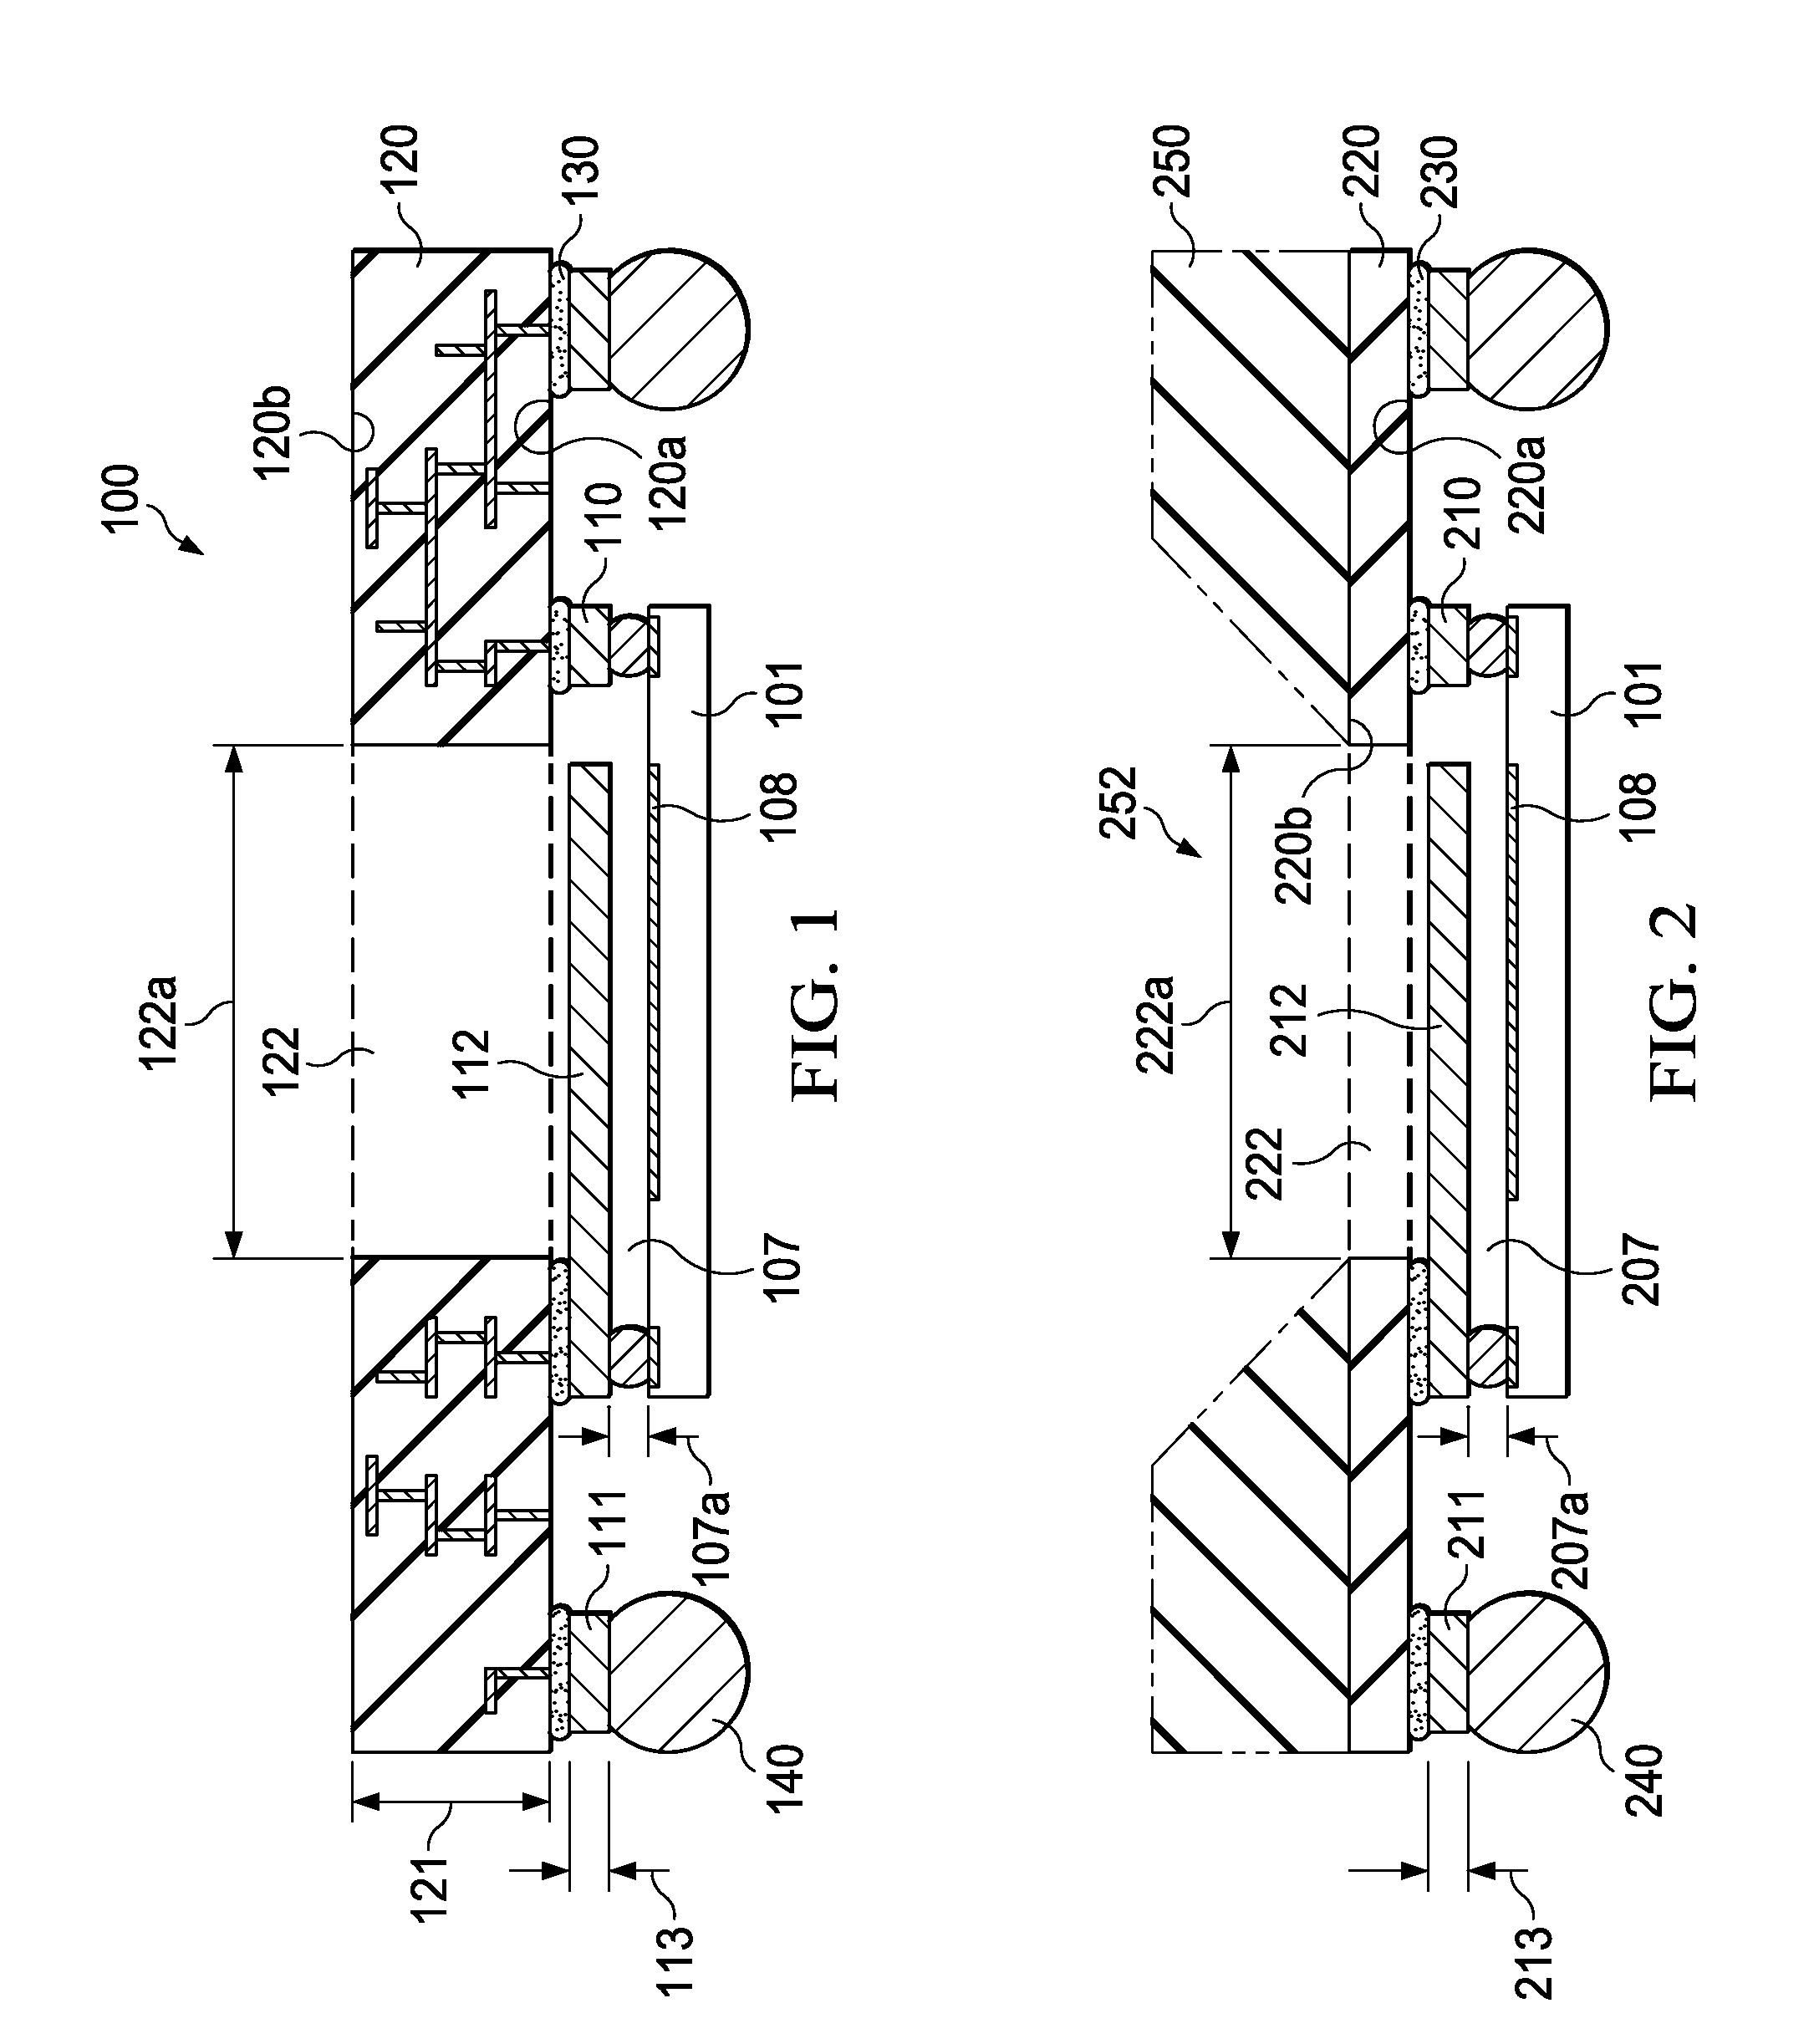 Micro-Electro-Mechanical System Having Movable Element Integrated into Substrate-Based Package